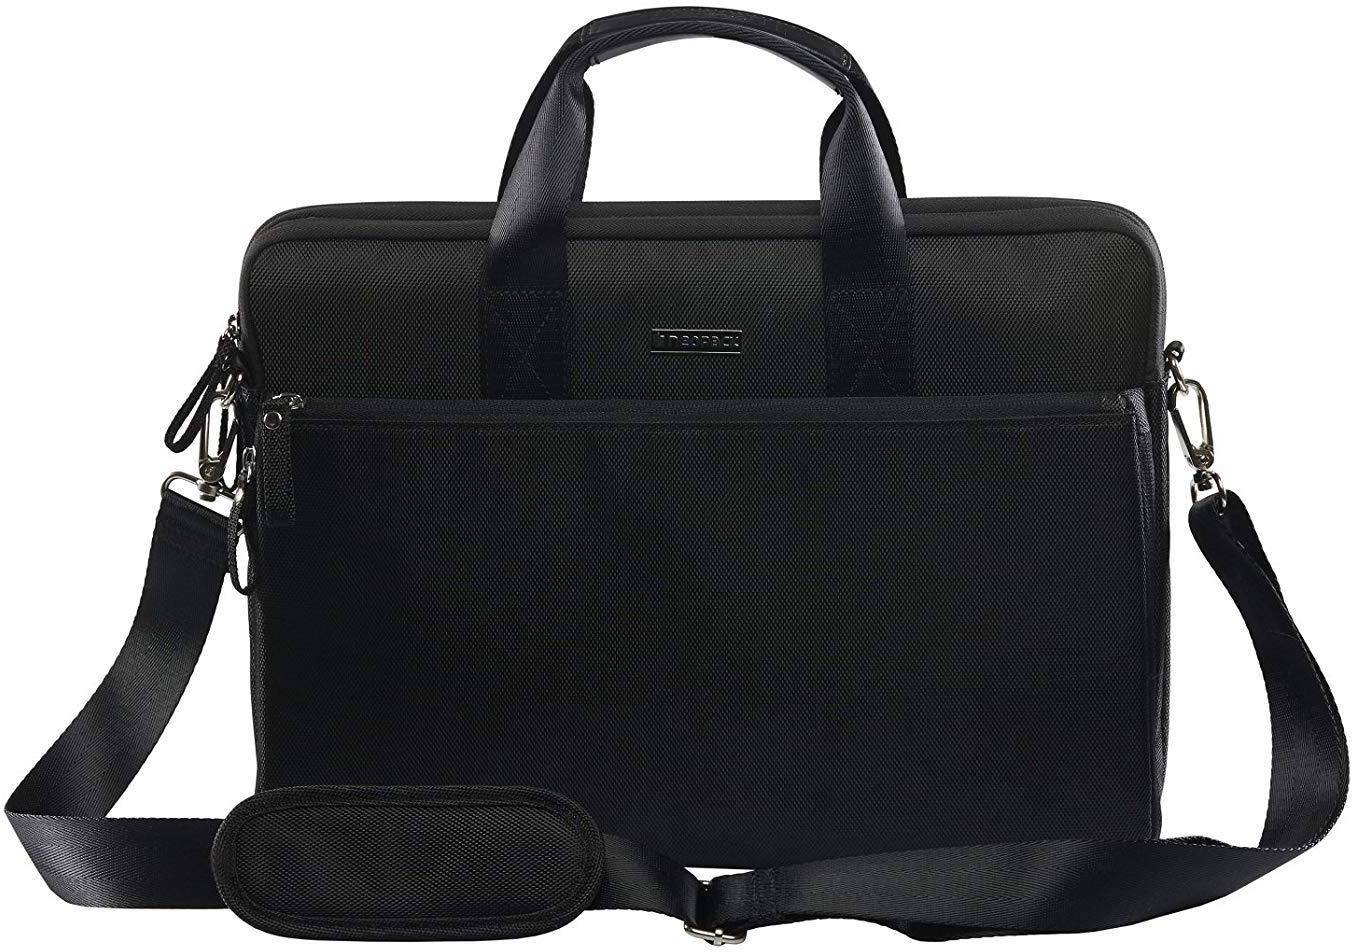 Buy Neopack Slim Line Bag 15 inches 8BK15 Laptop Accessories Online in India at Lowest Price | VPLAK